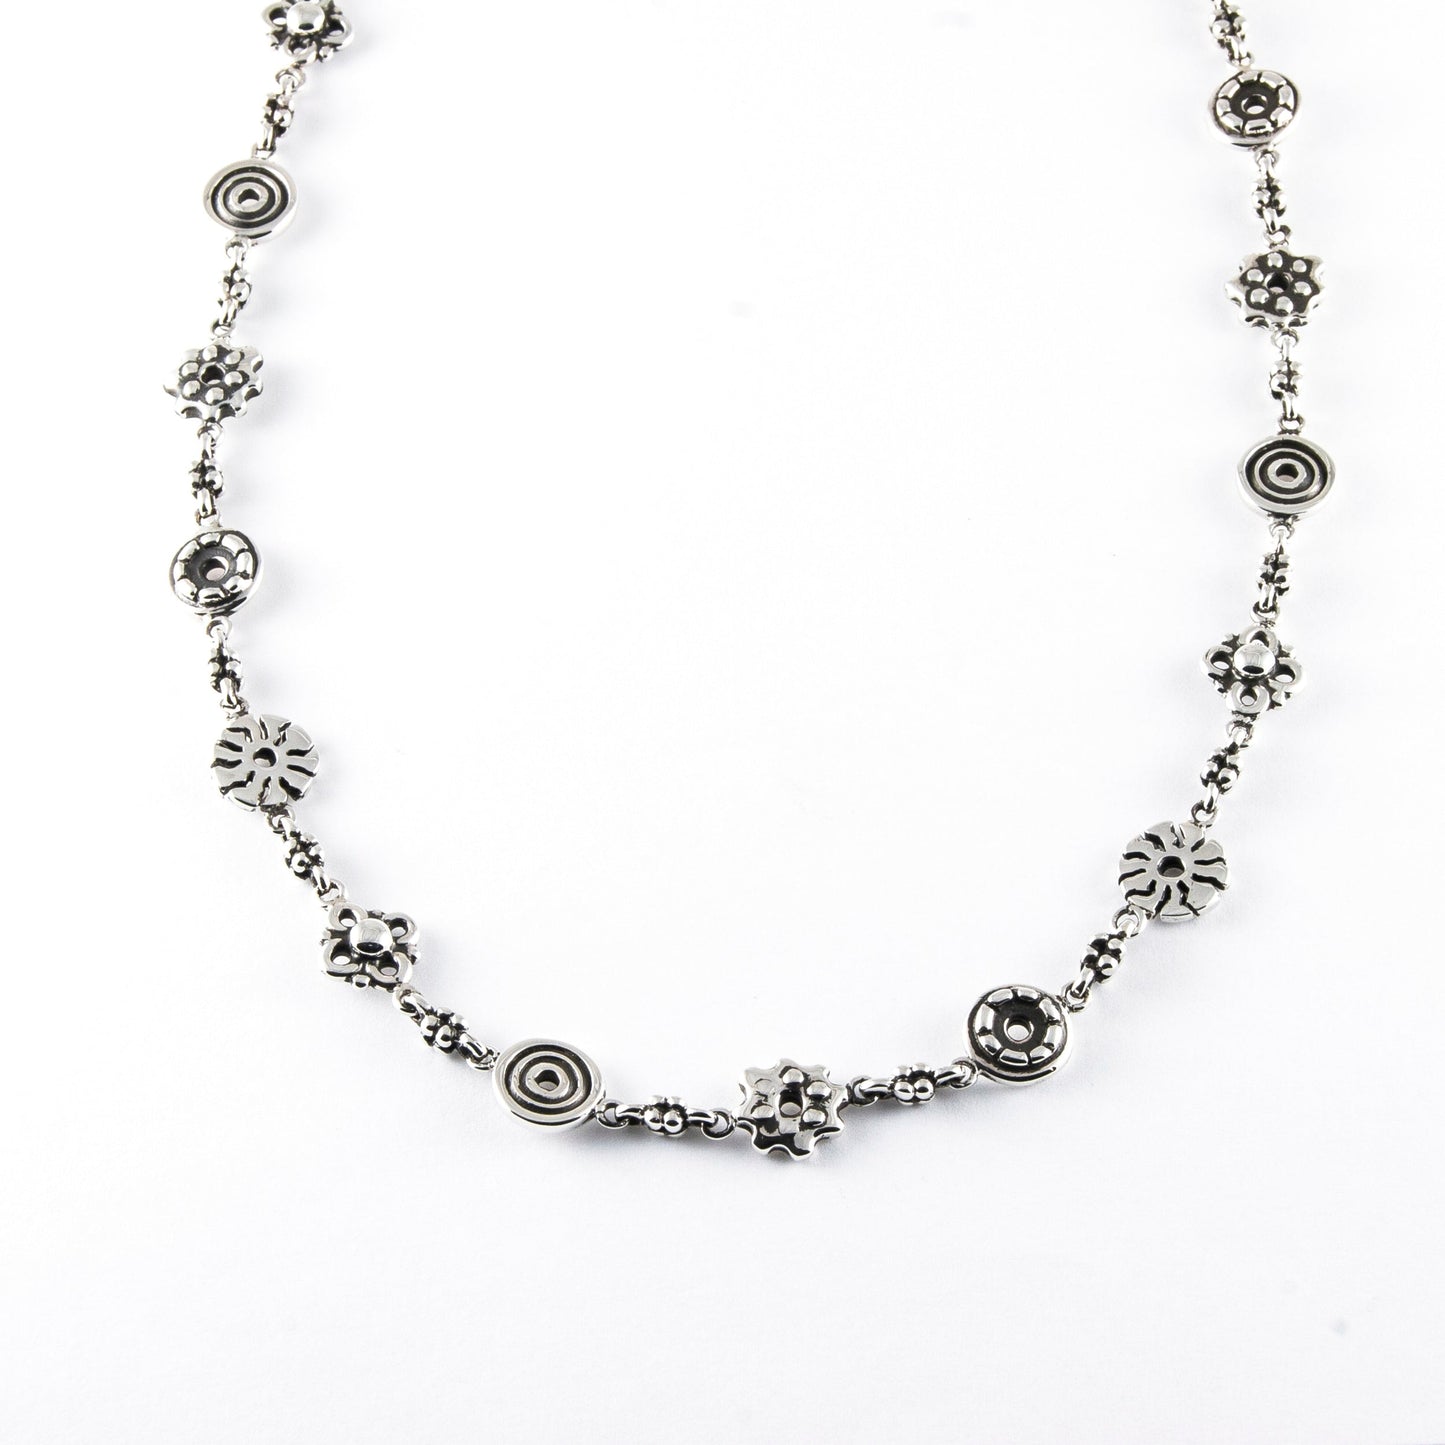 Industrial Links Necklace